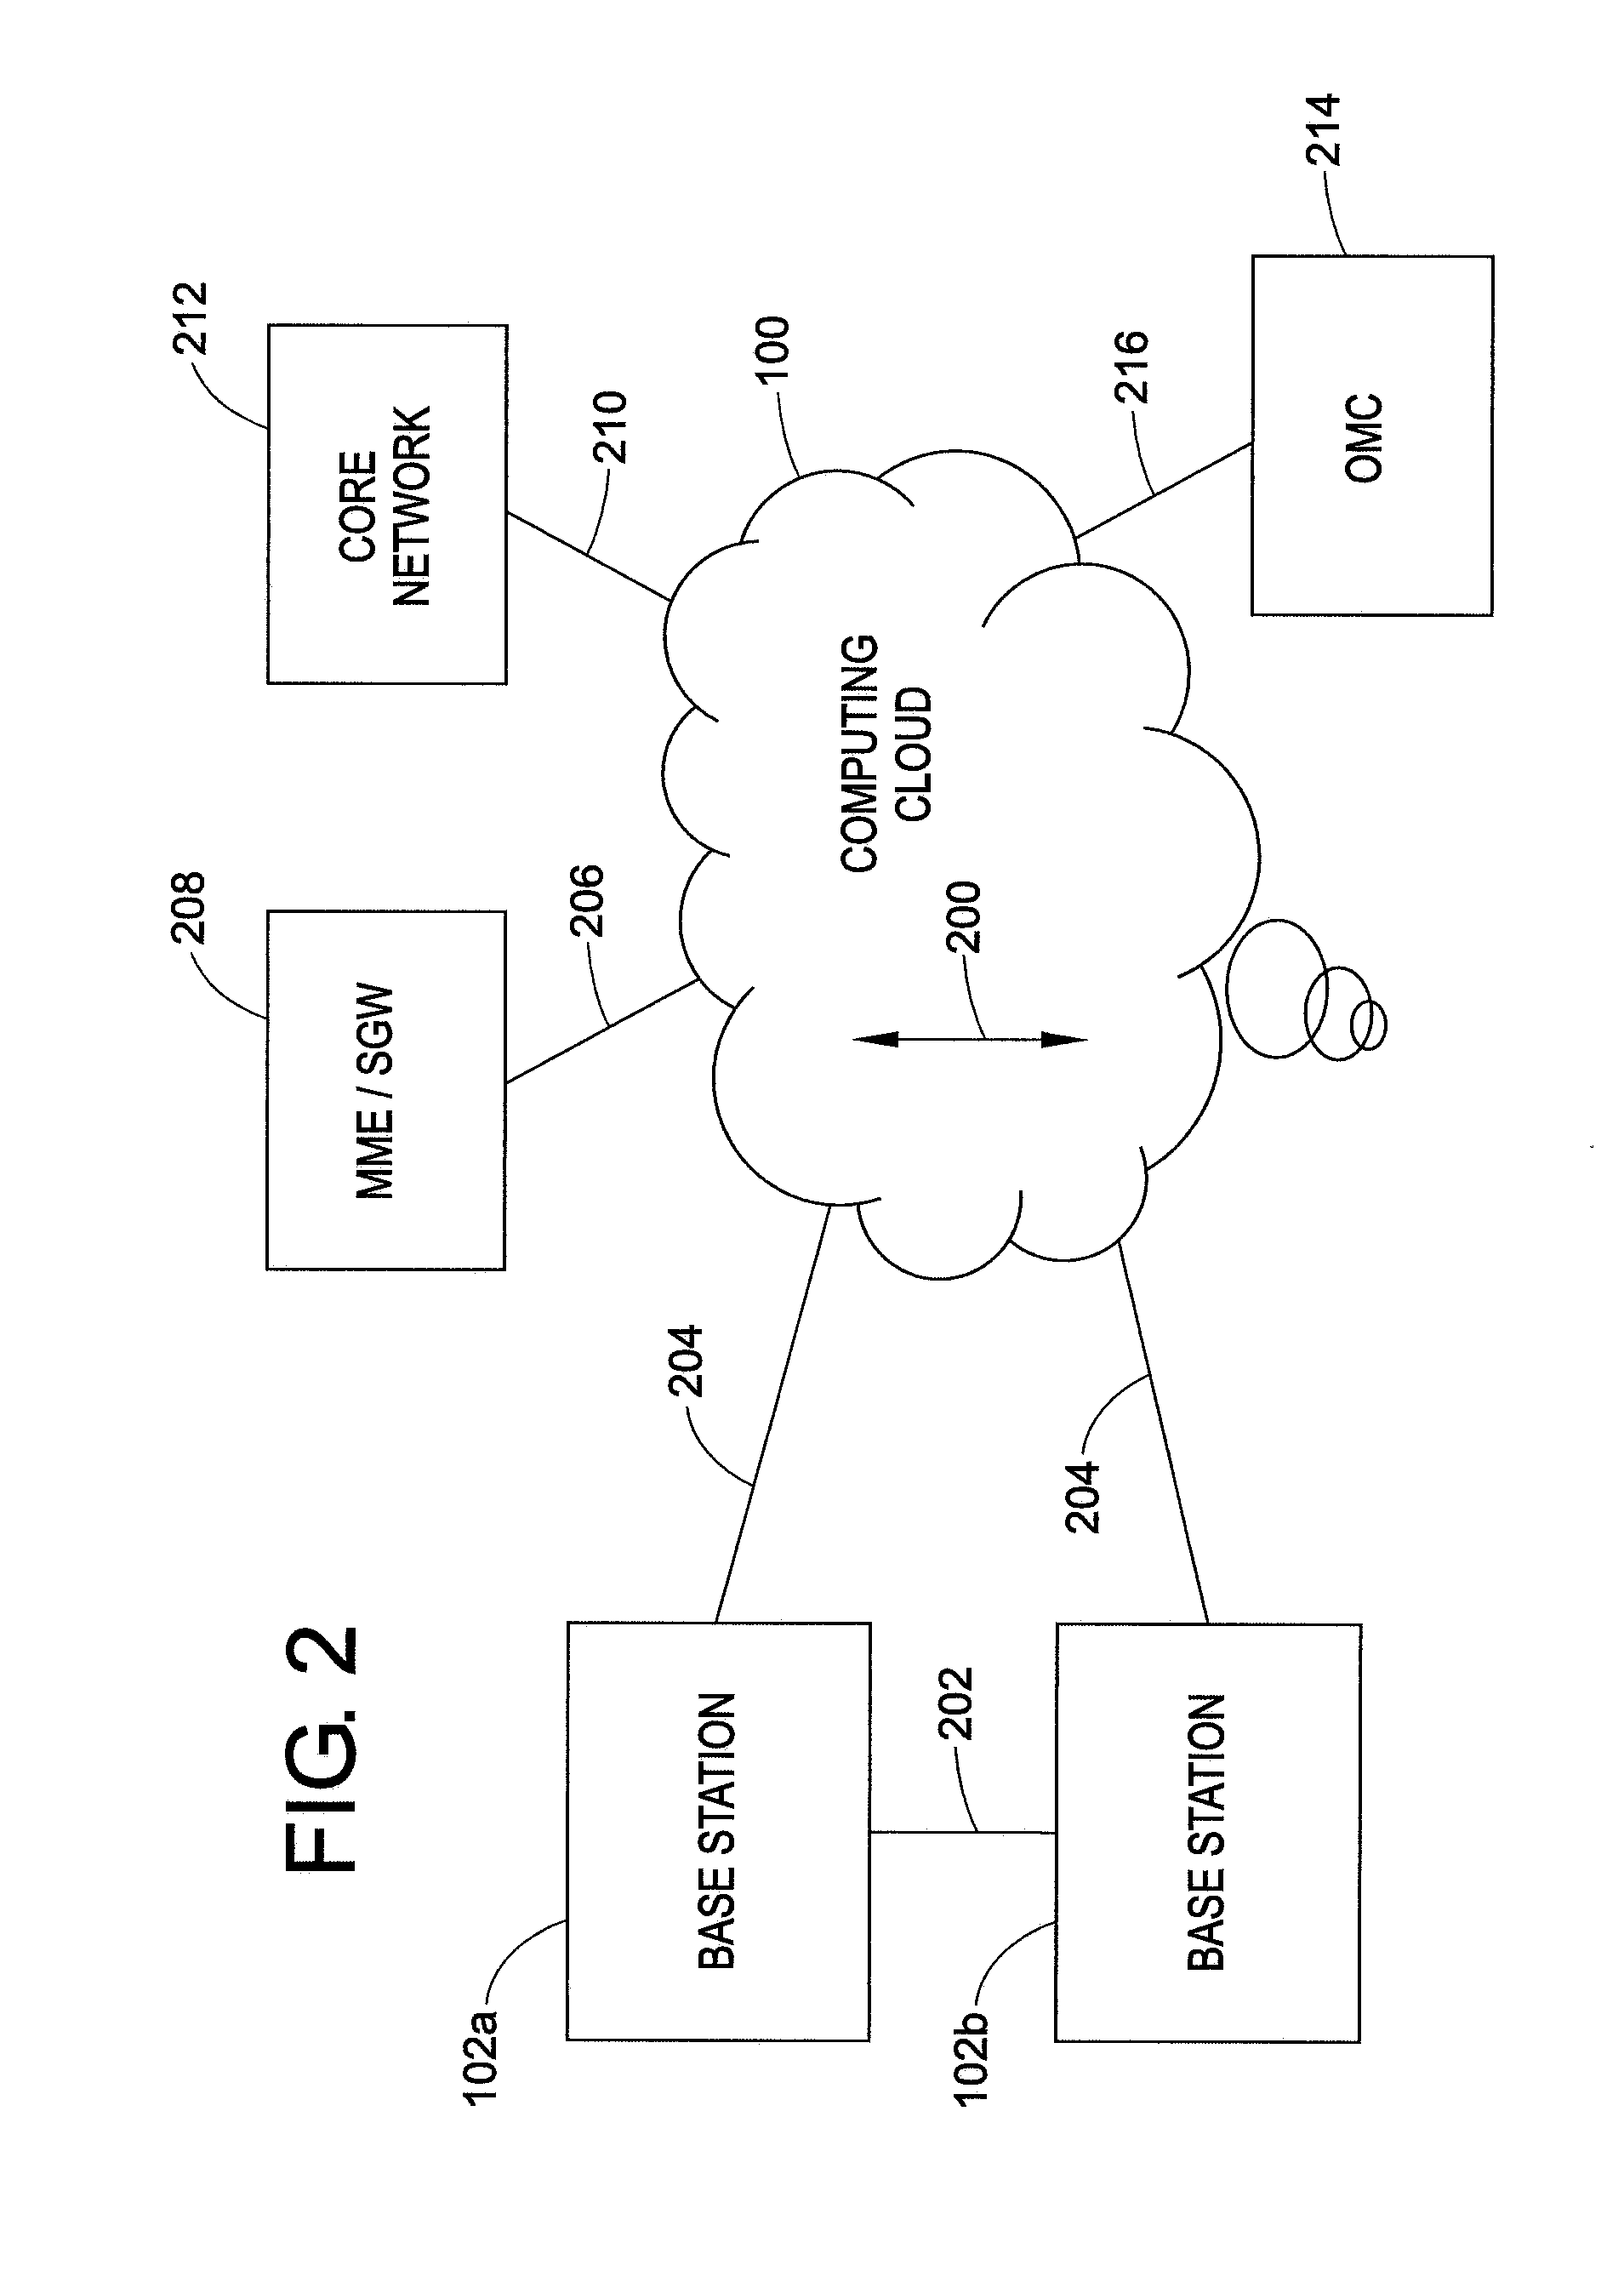 Computing cloud in a wireless telecommunication system